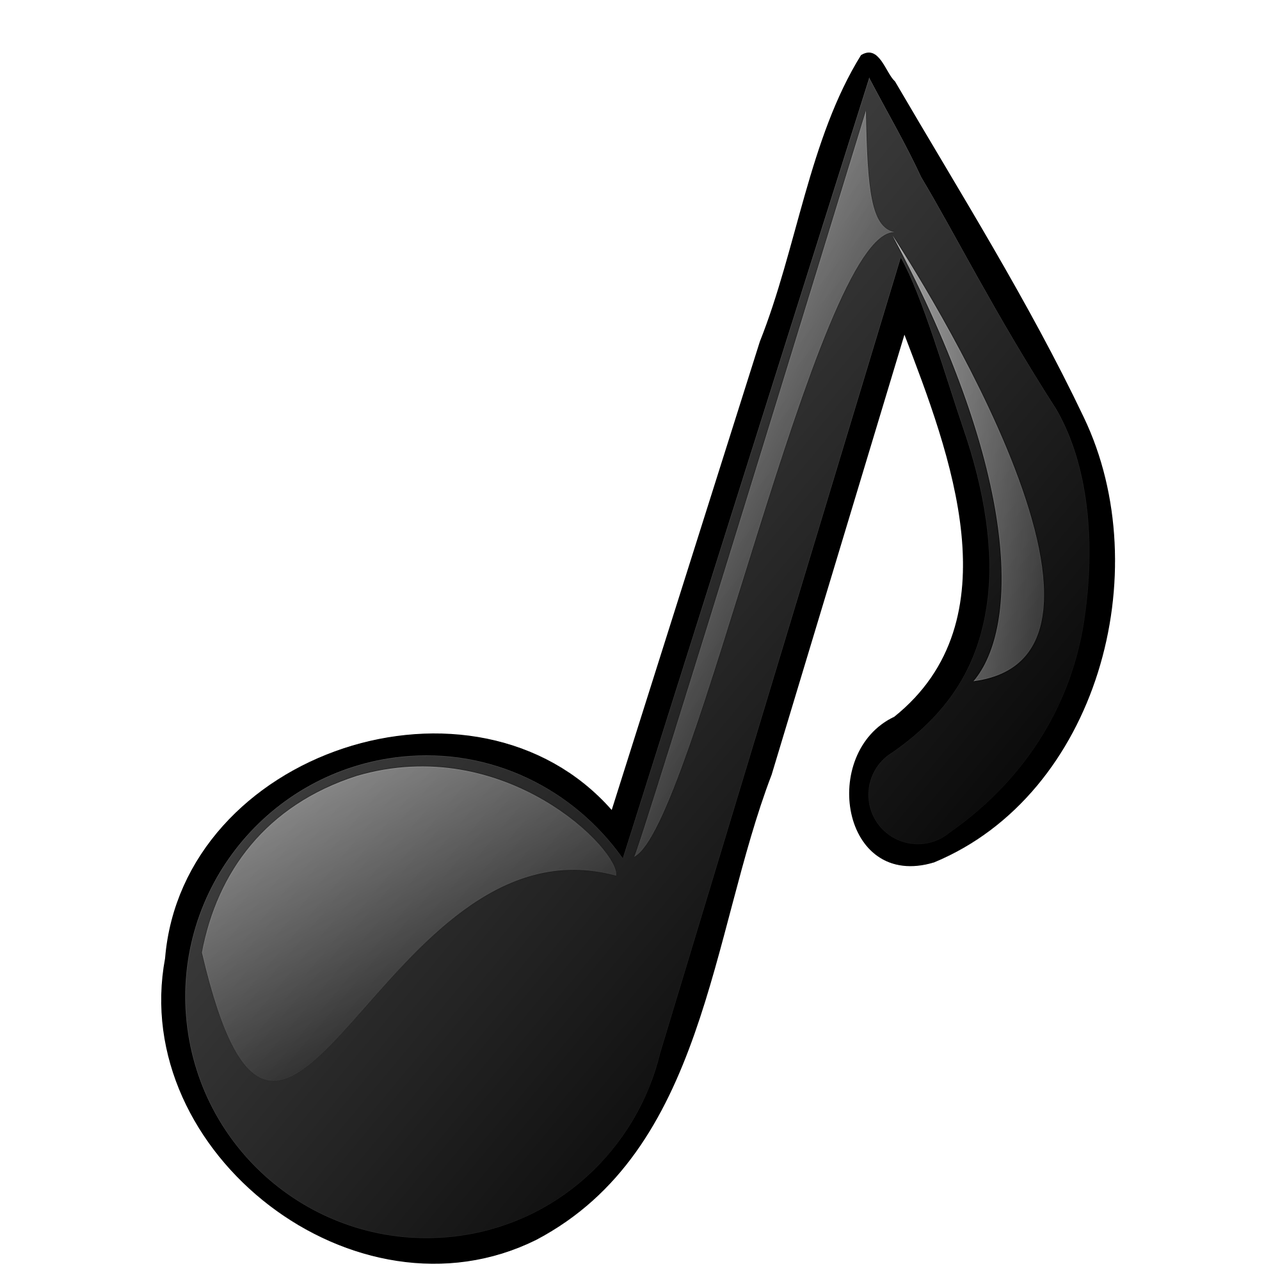 Download free photo of Music note,quaver,png,melody,composition - from ...